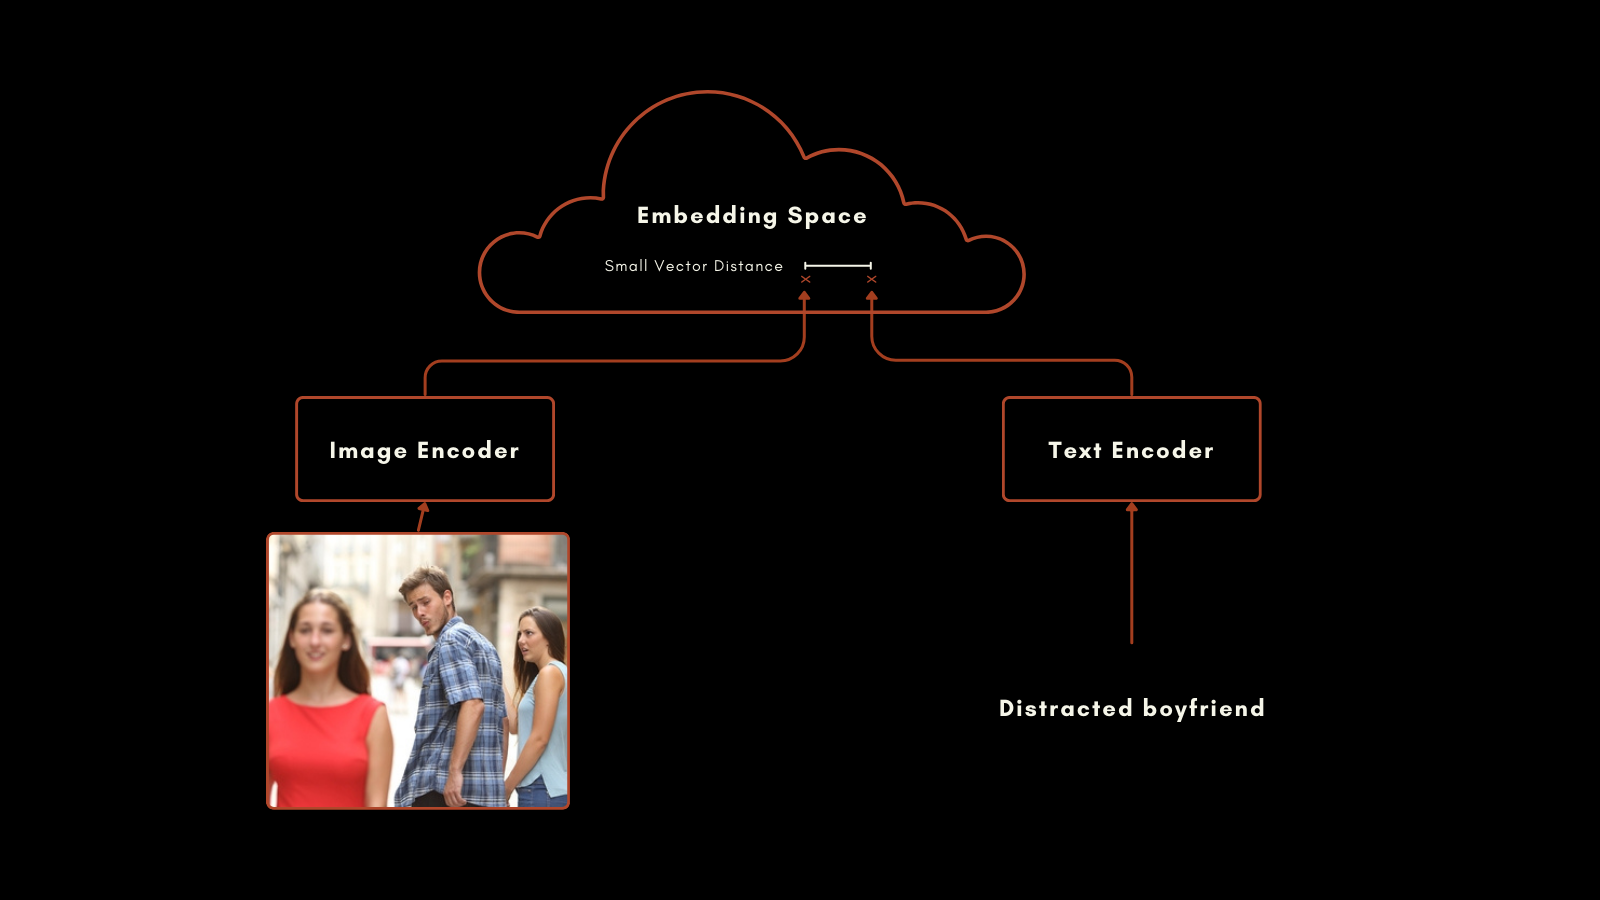 Flowchart with text "Embedding Space", linked to "Image Encoder" and "Text Encoder", with a "Distracted boyfriend" label.